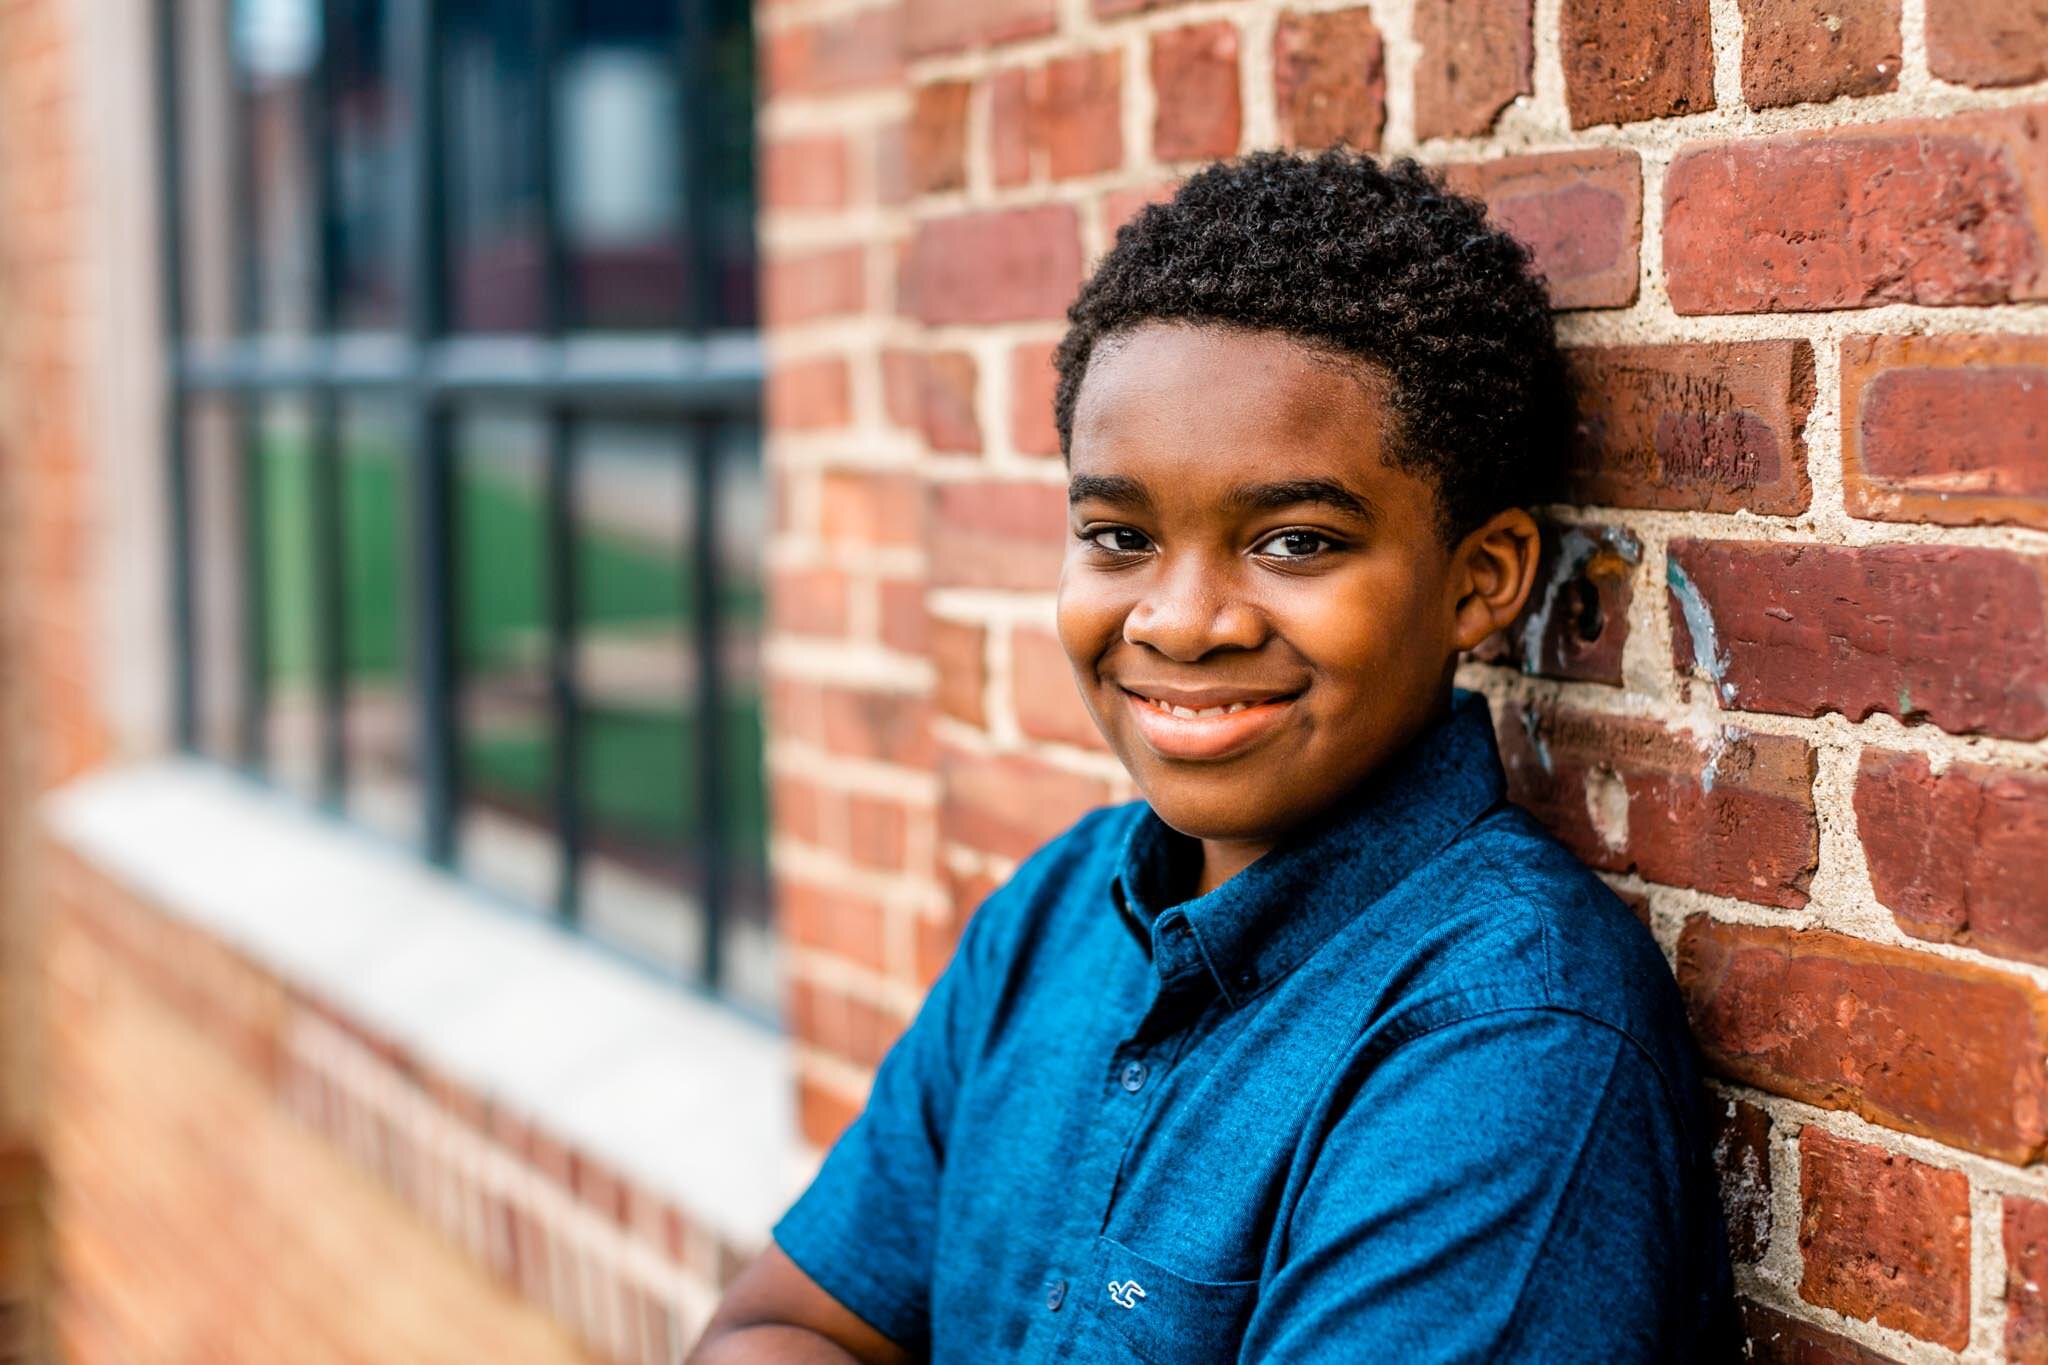 Durham Family Photographer | By G. Lin Photography | Young boy leaning on brick wall